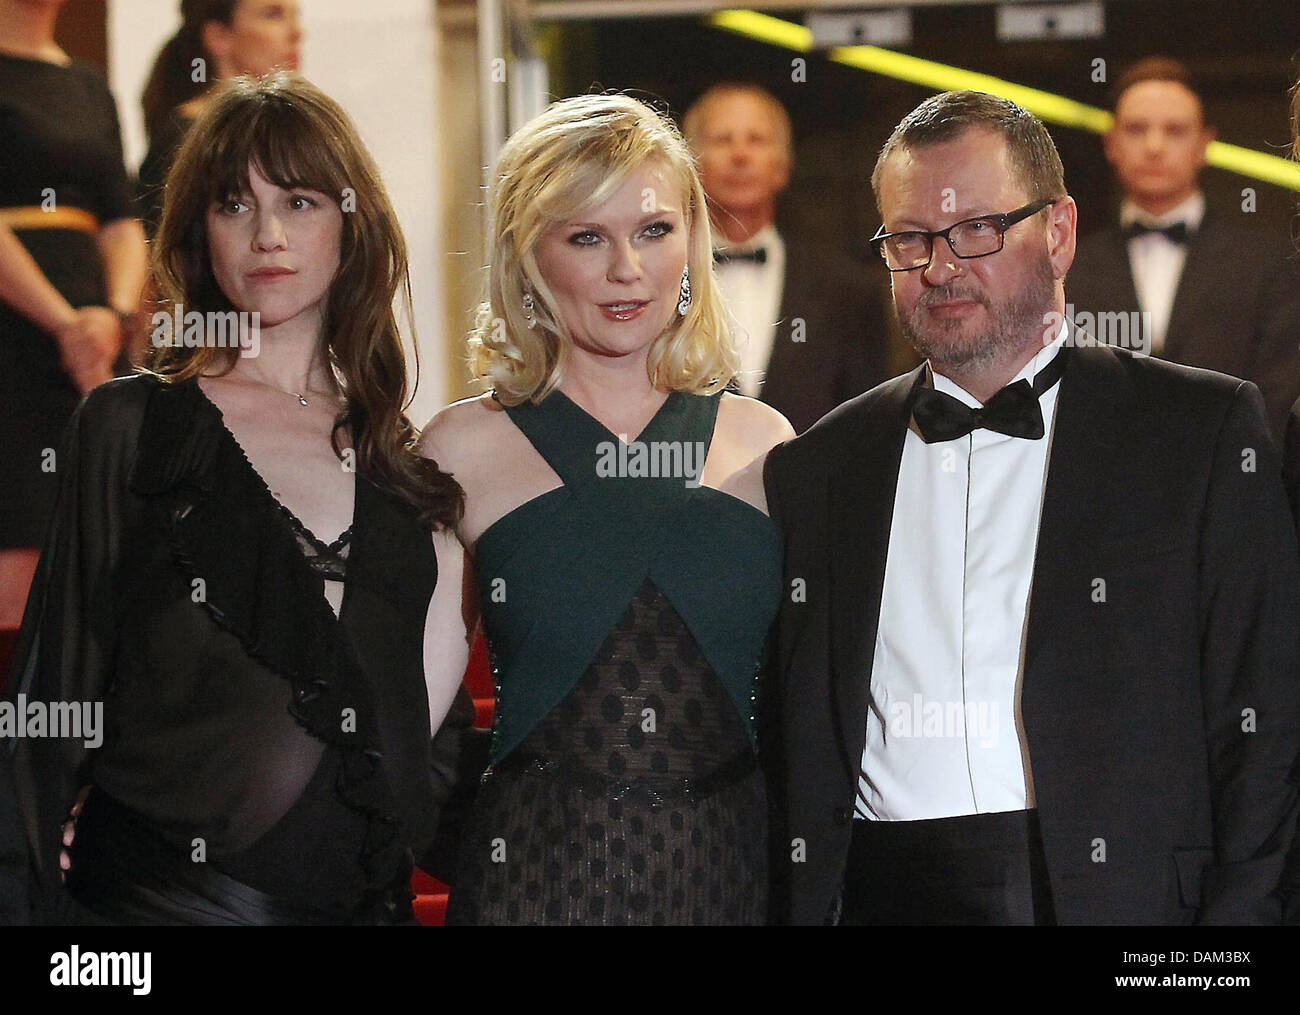 (dpa file) - A file picture dated 18 May 2011 shows Danish director Lars Von Trier (R) arriving for the screening of his movie 'Melancholia' during the 64th Cannes Film Festival in Cannes, France. Von Trier stirred controversy with remarks about his being a Nazi at a press conference on his movie in Cannes on 18 May 2011. After the press office of the Cannes Film Festival issued a  Stock Photo